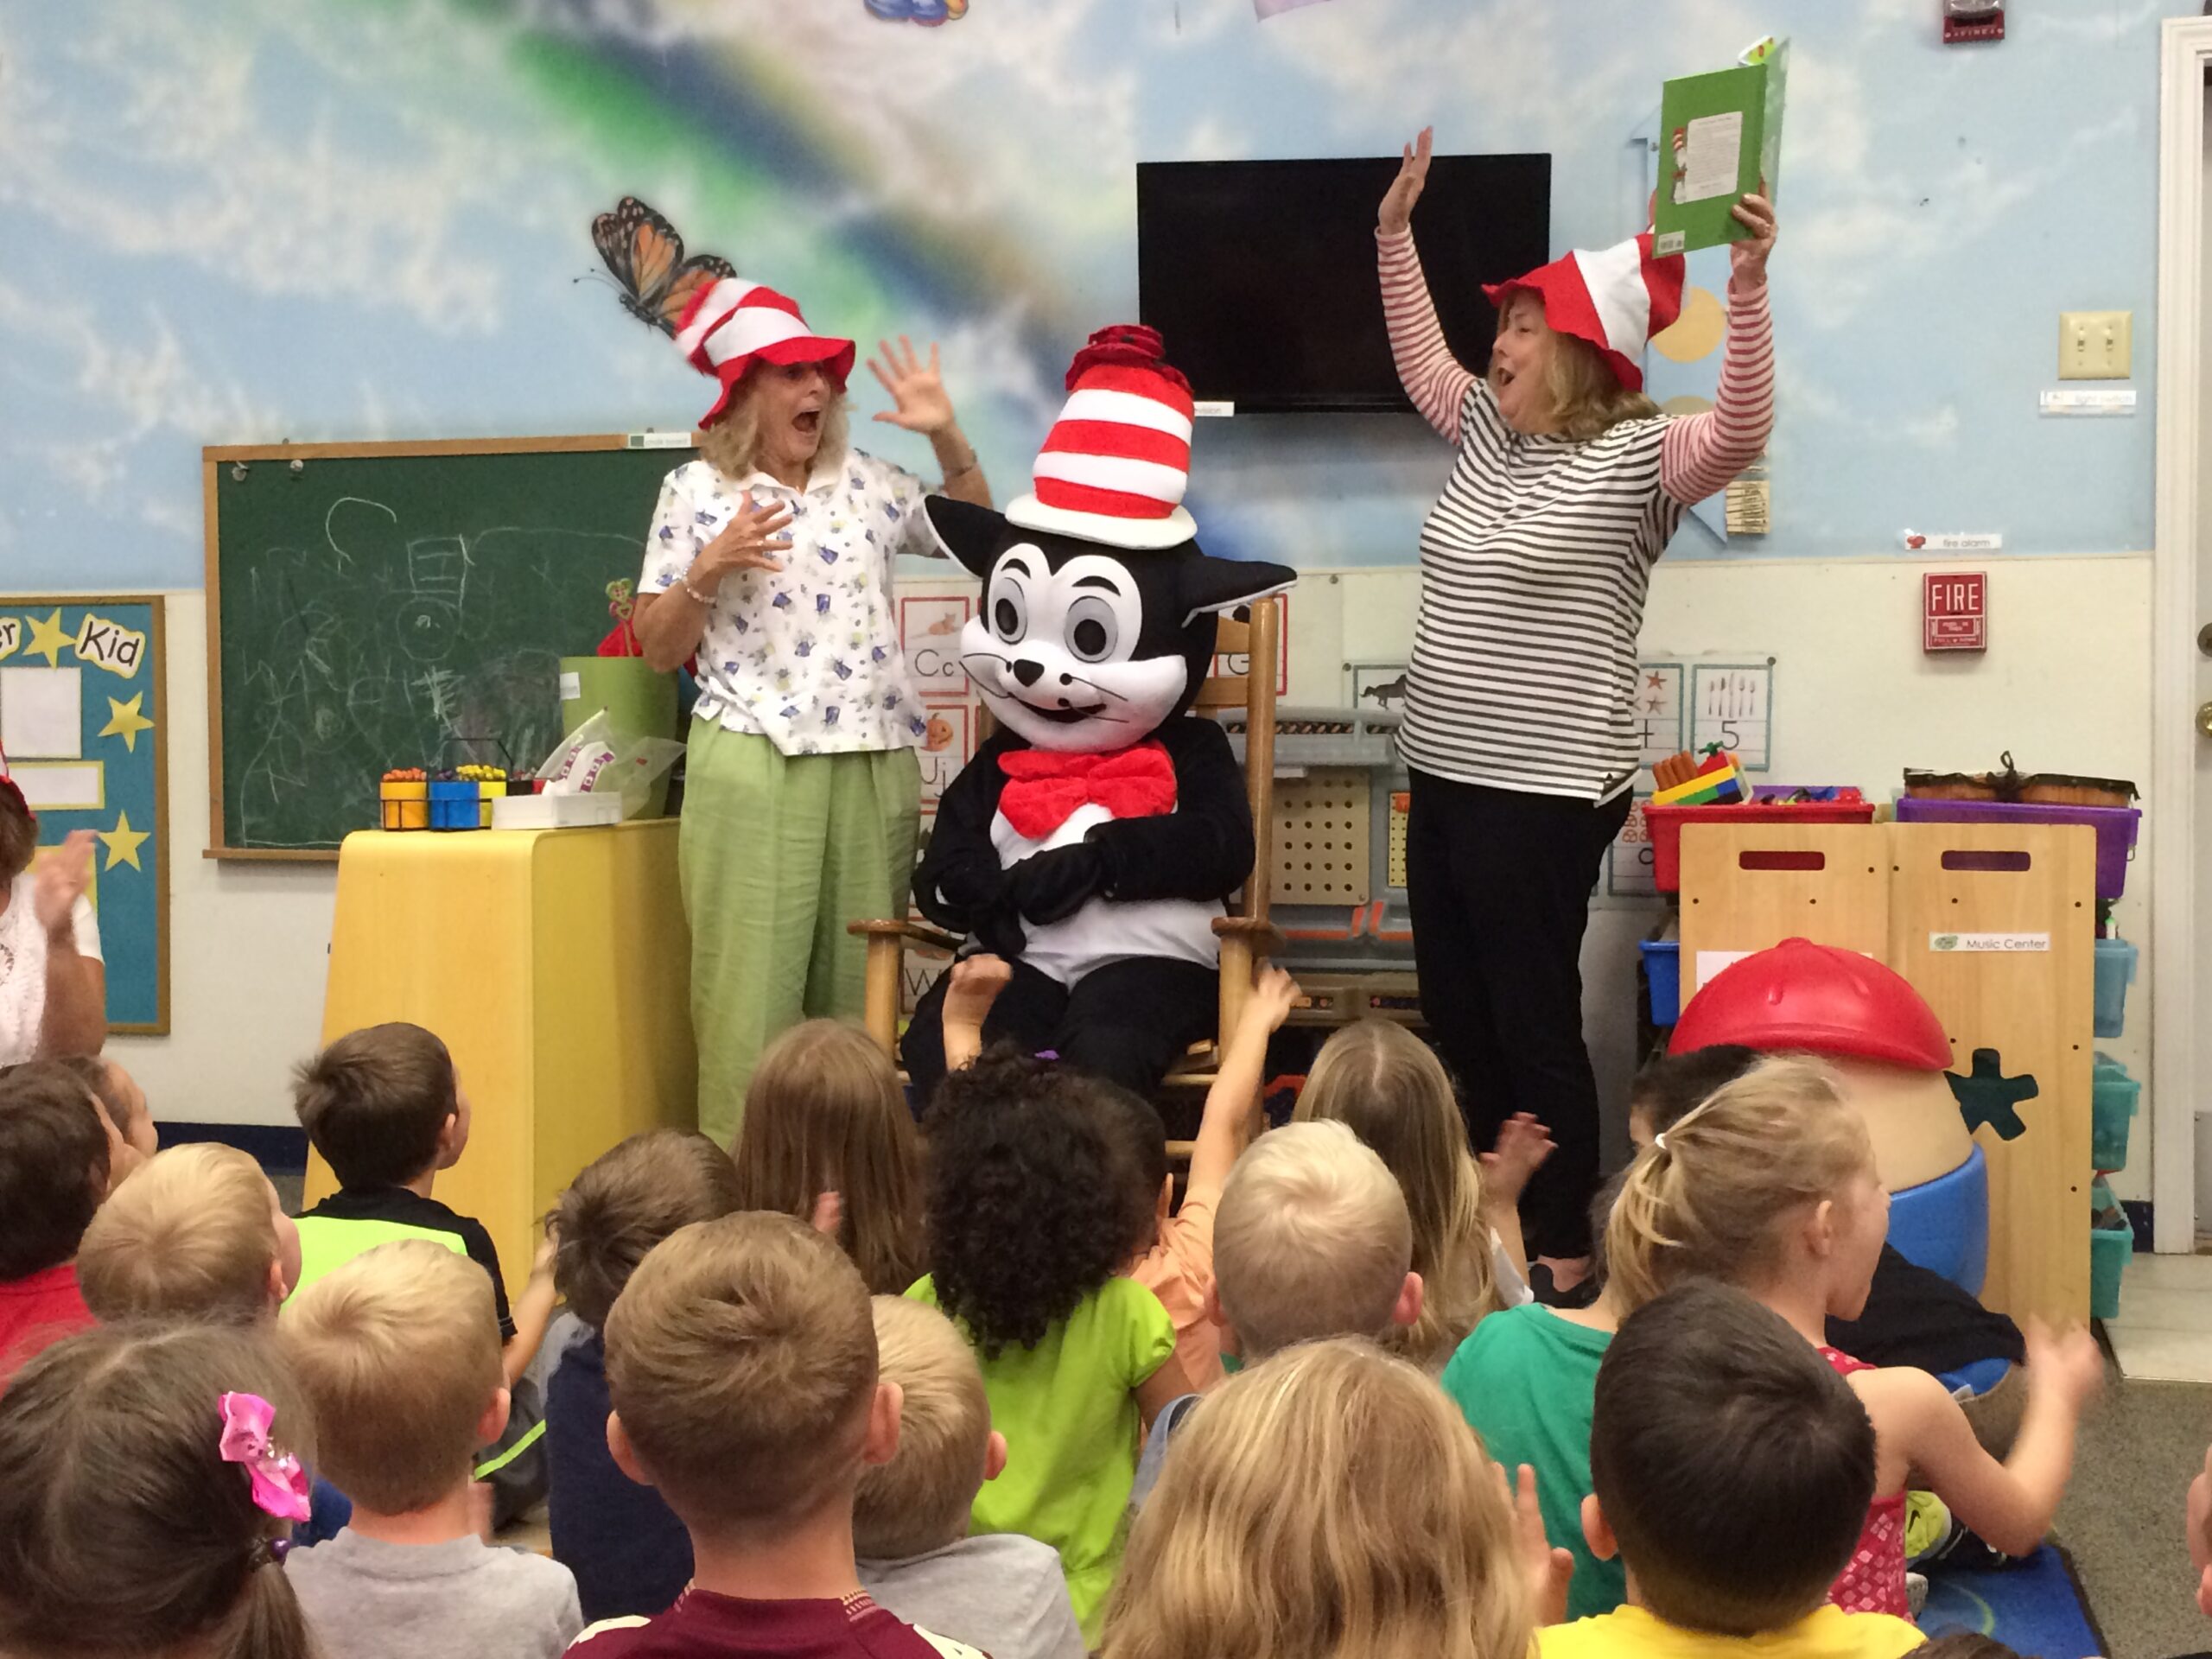 ELC volunteers Cathy Voss, Teresa Widman and special guest “The Cat in the Hat” enjoy story time at KidsFirst Learning Center in Middleburg.